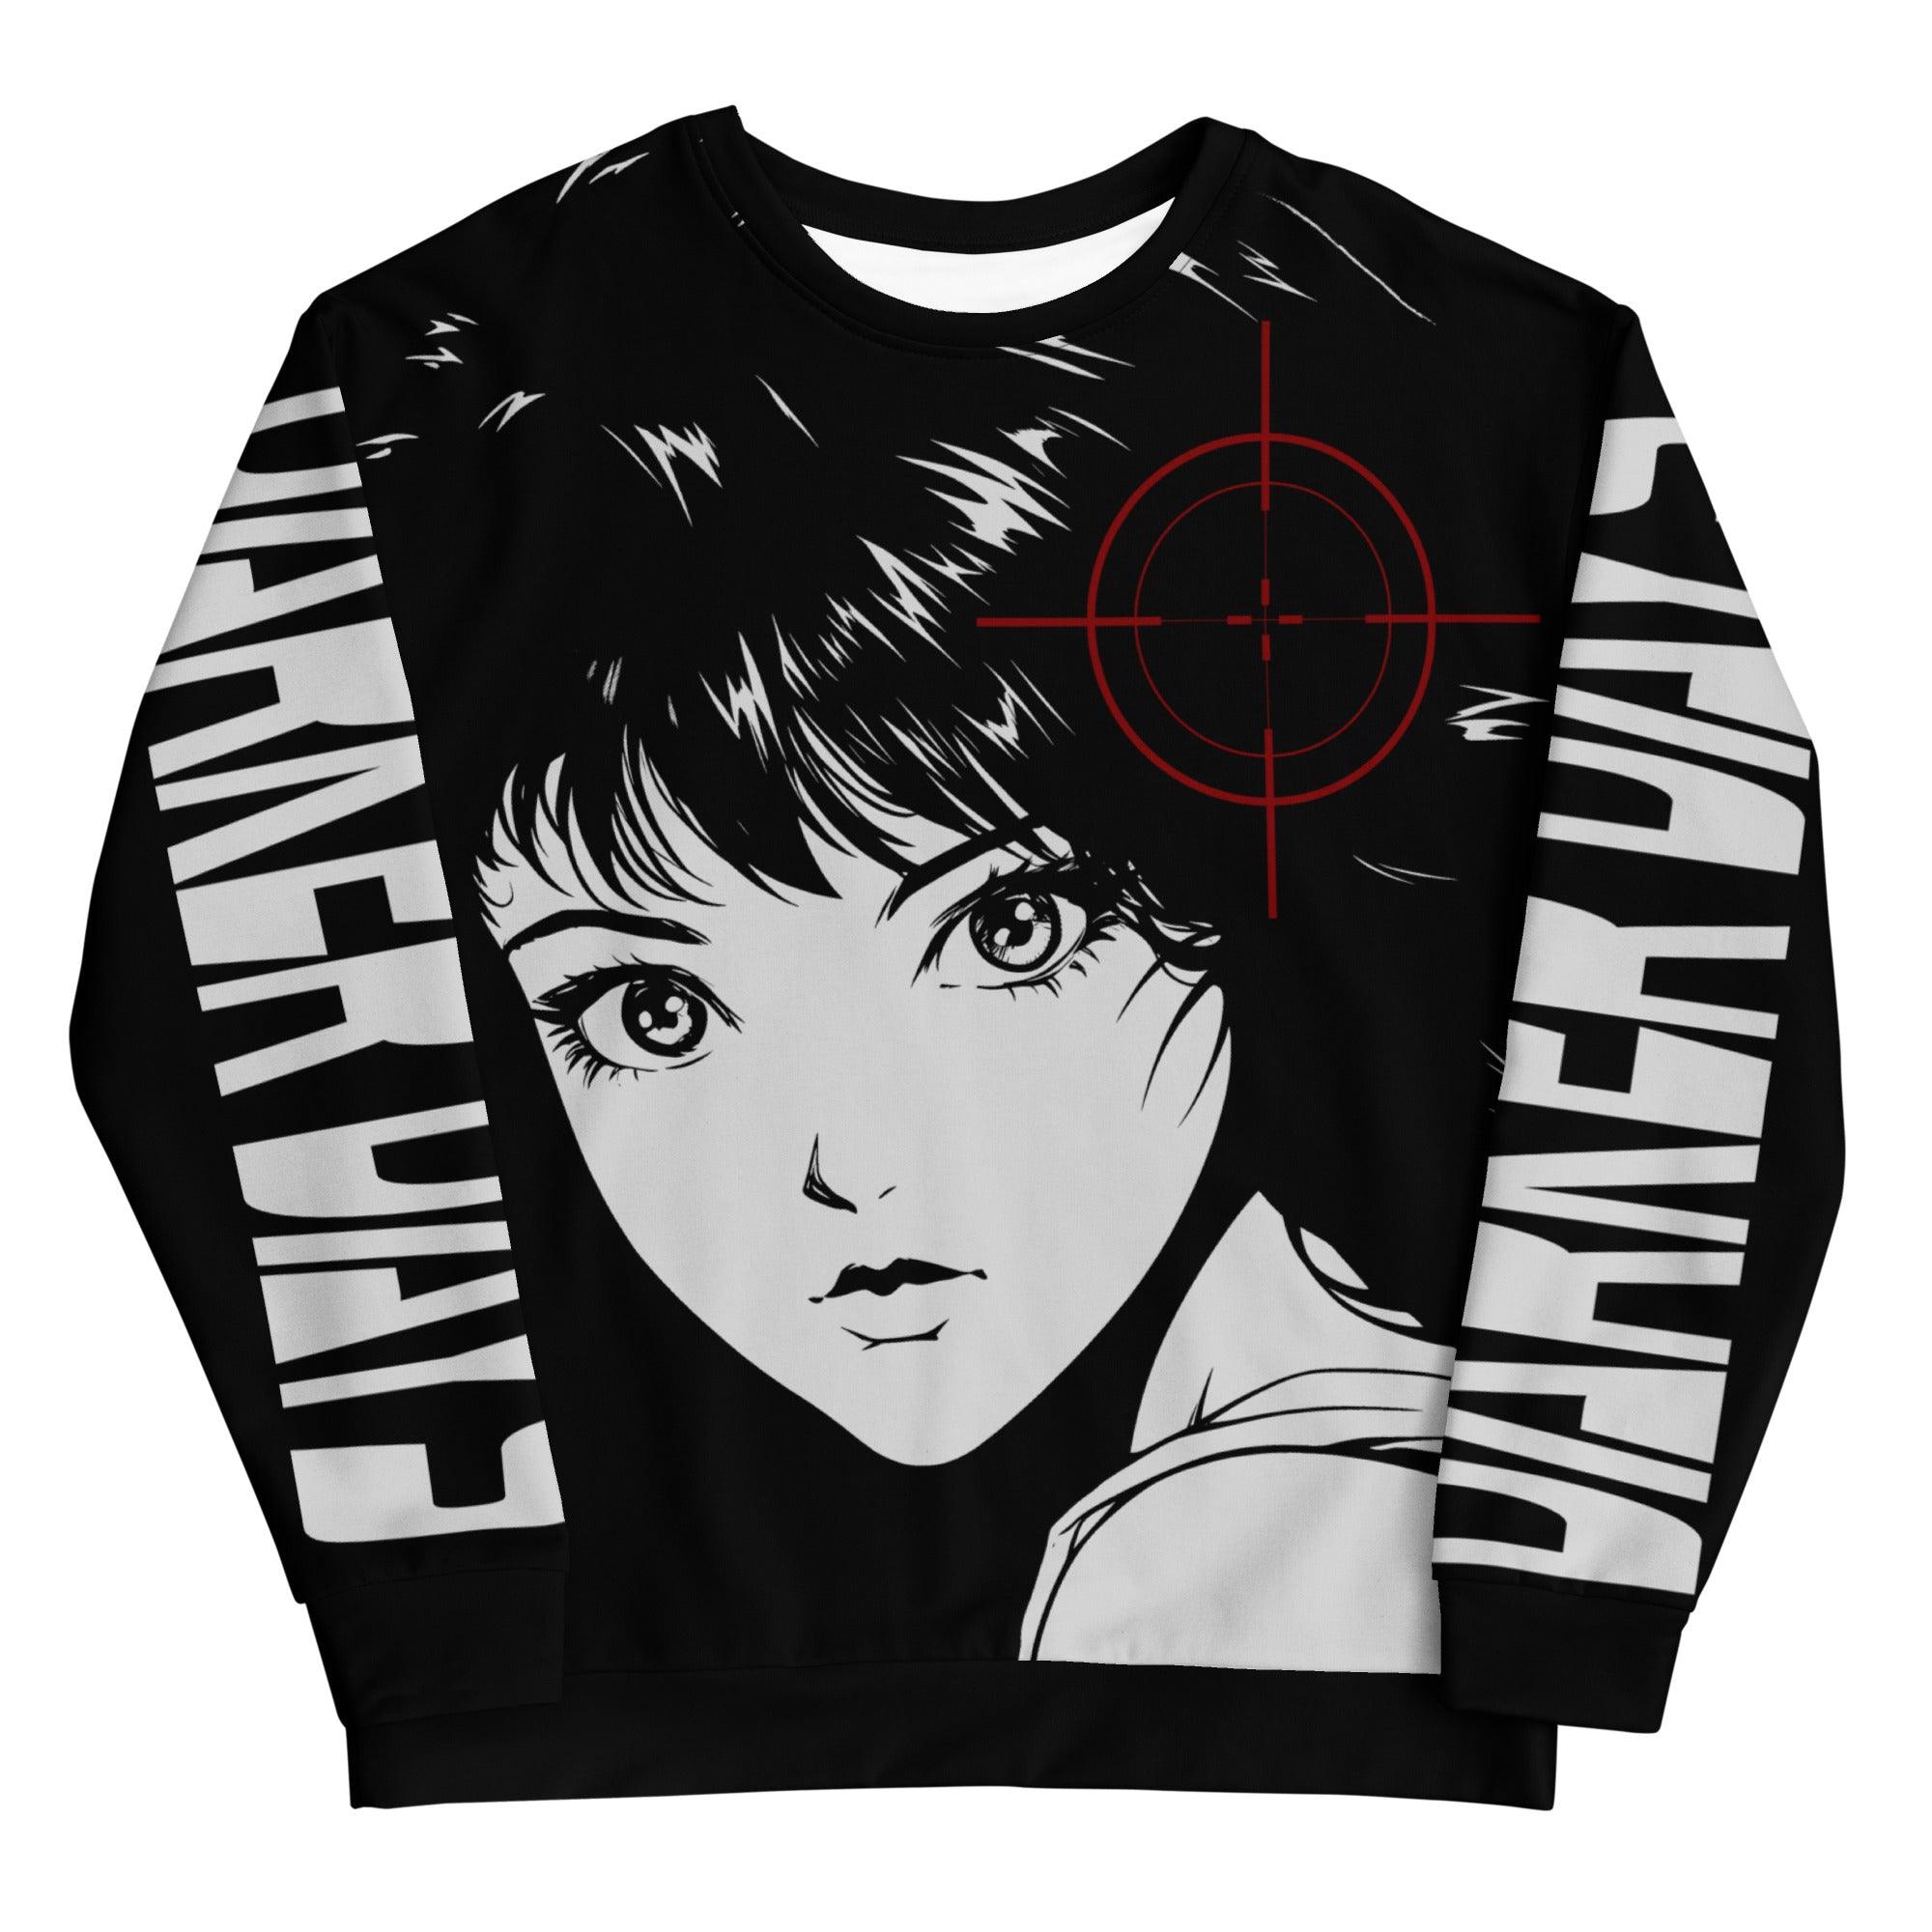 Black sweatshirt featuring an anime-inspired design of a girl's face with a red target overlay on her eye, and the words 'Darker Days' printed in bold letters along the sleeves.